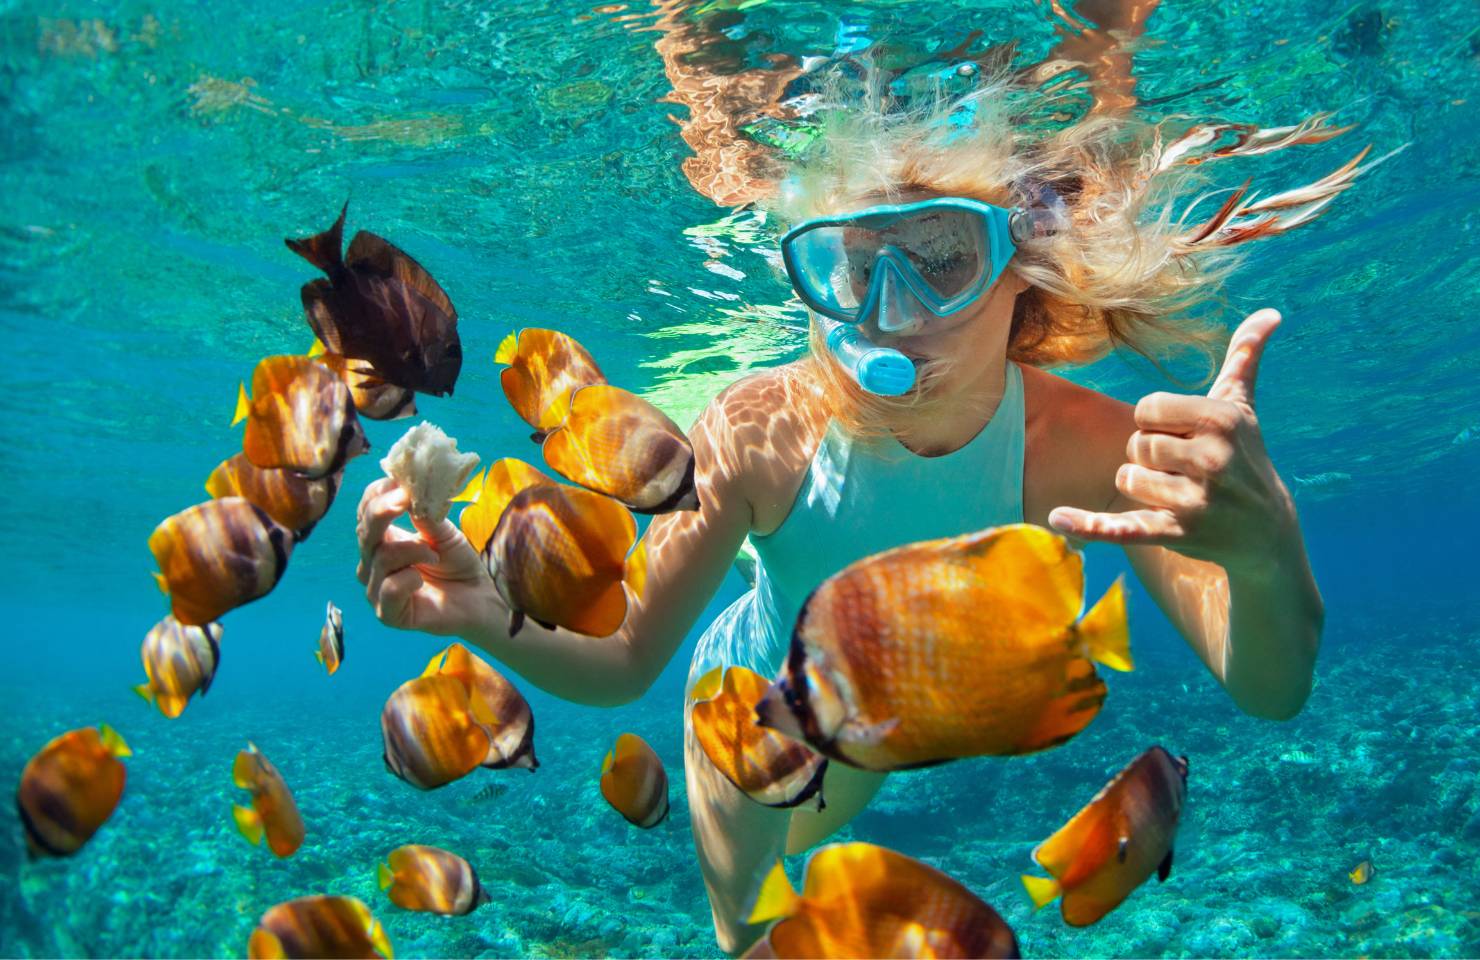 A woman snorkels surrounded by orange fish in turquoise waters